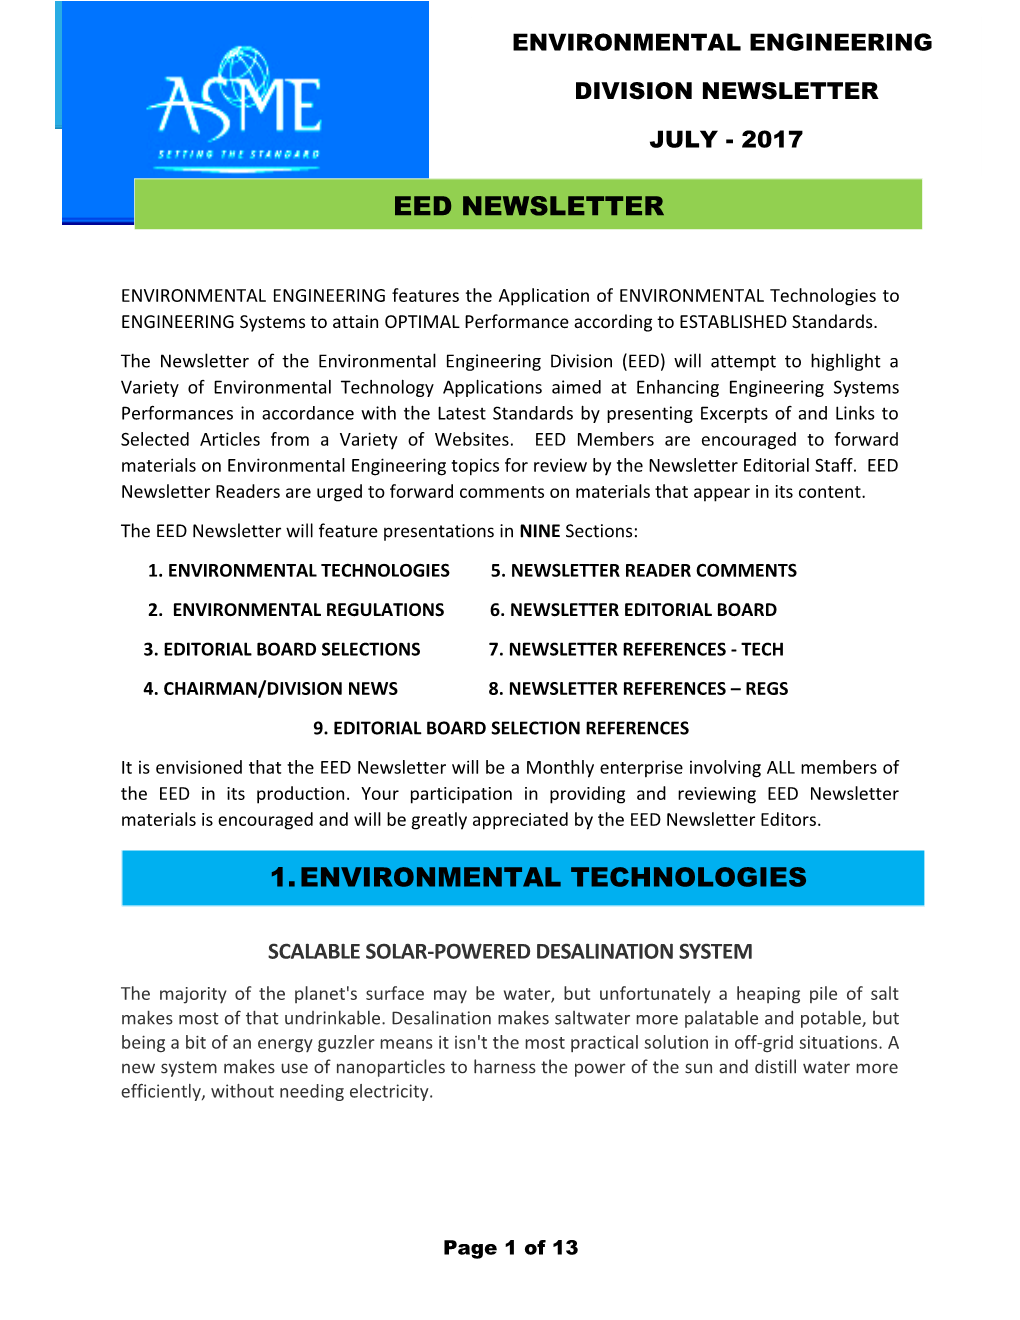 The EED Newsletter Will Feature Presentations in NINE Sections